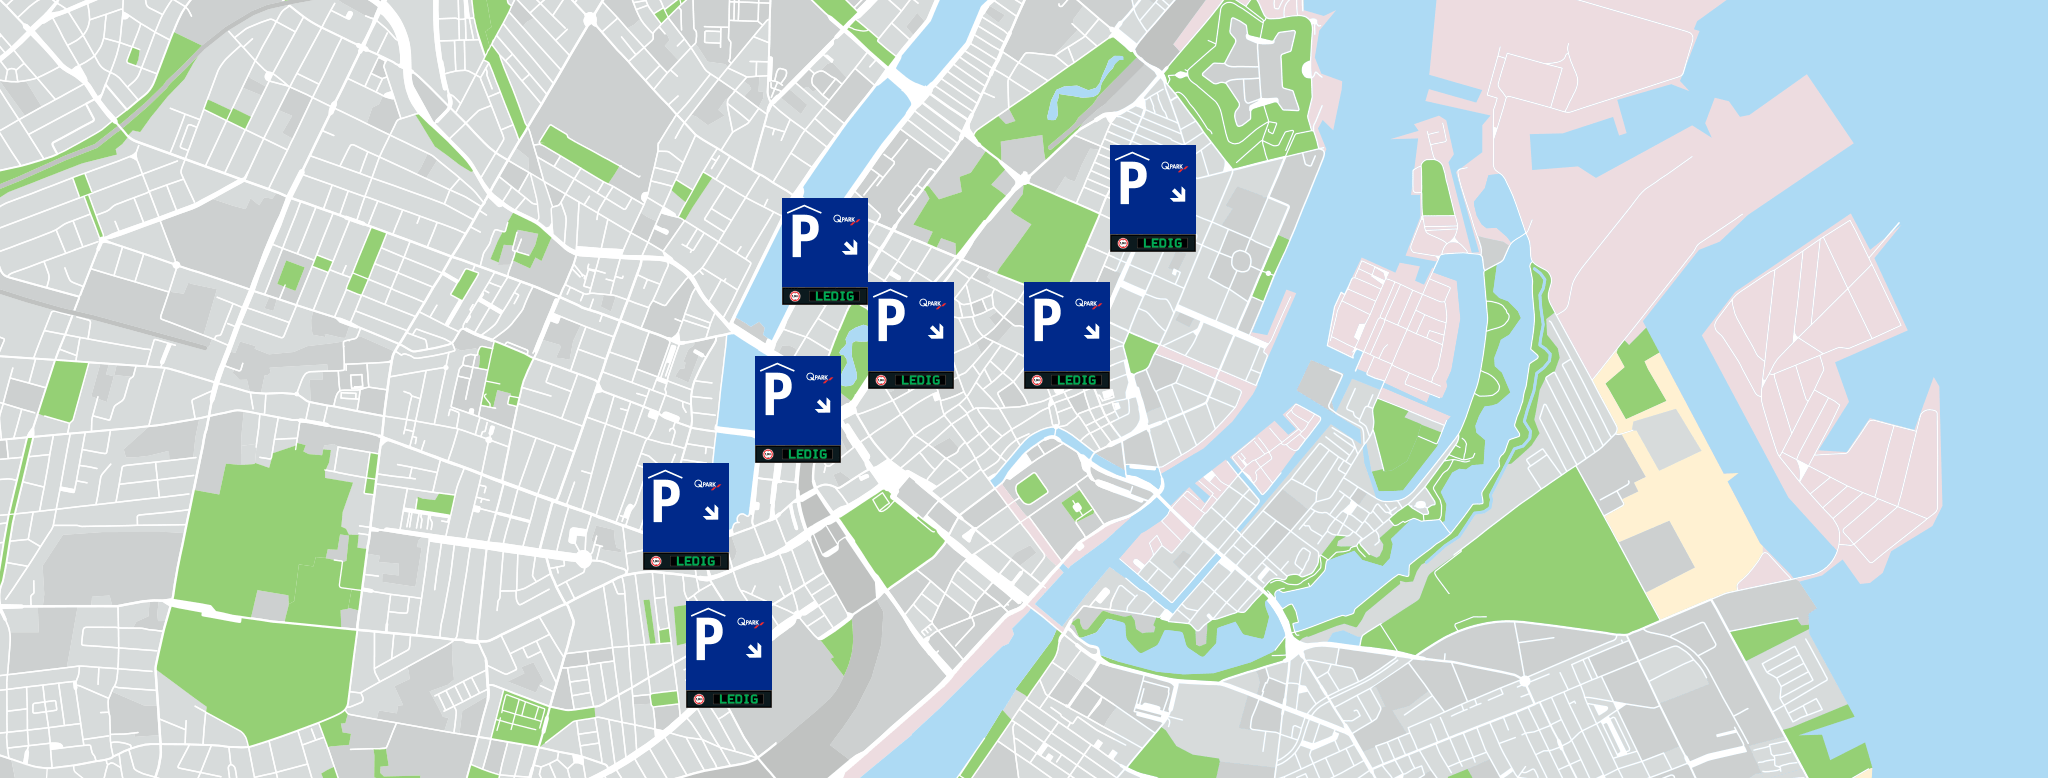 Q-Park has over 3,000 spaces in central locations throughout Copenhagen.